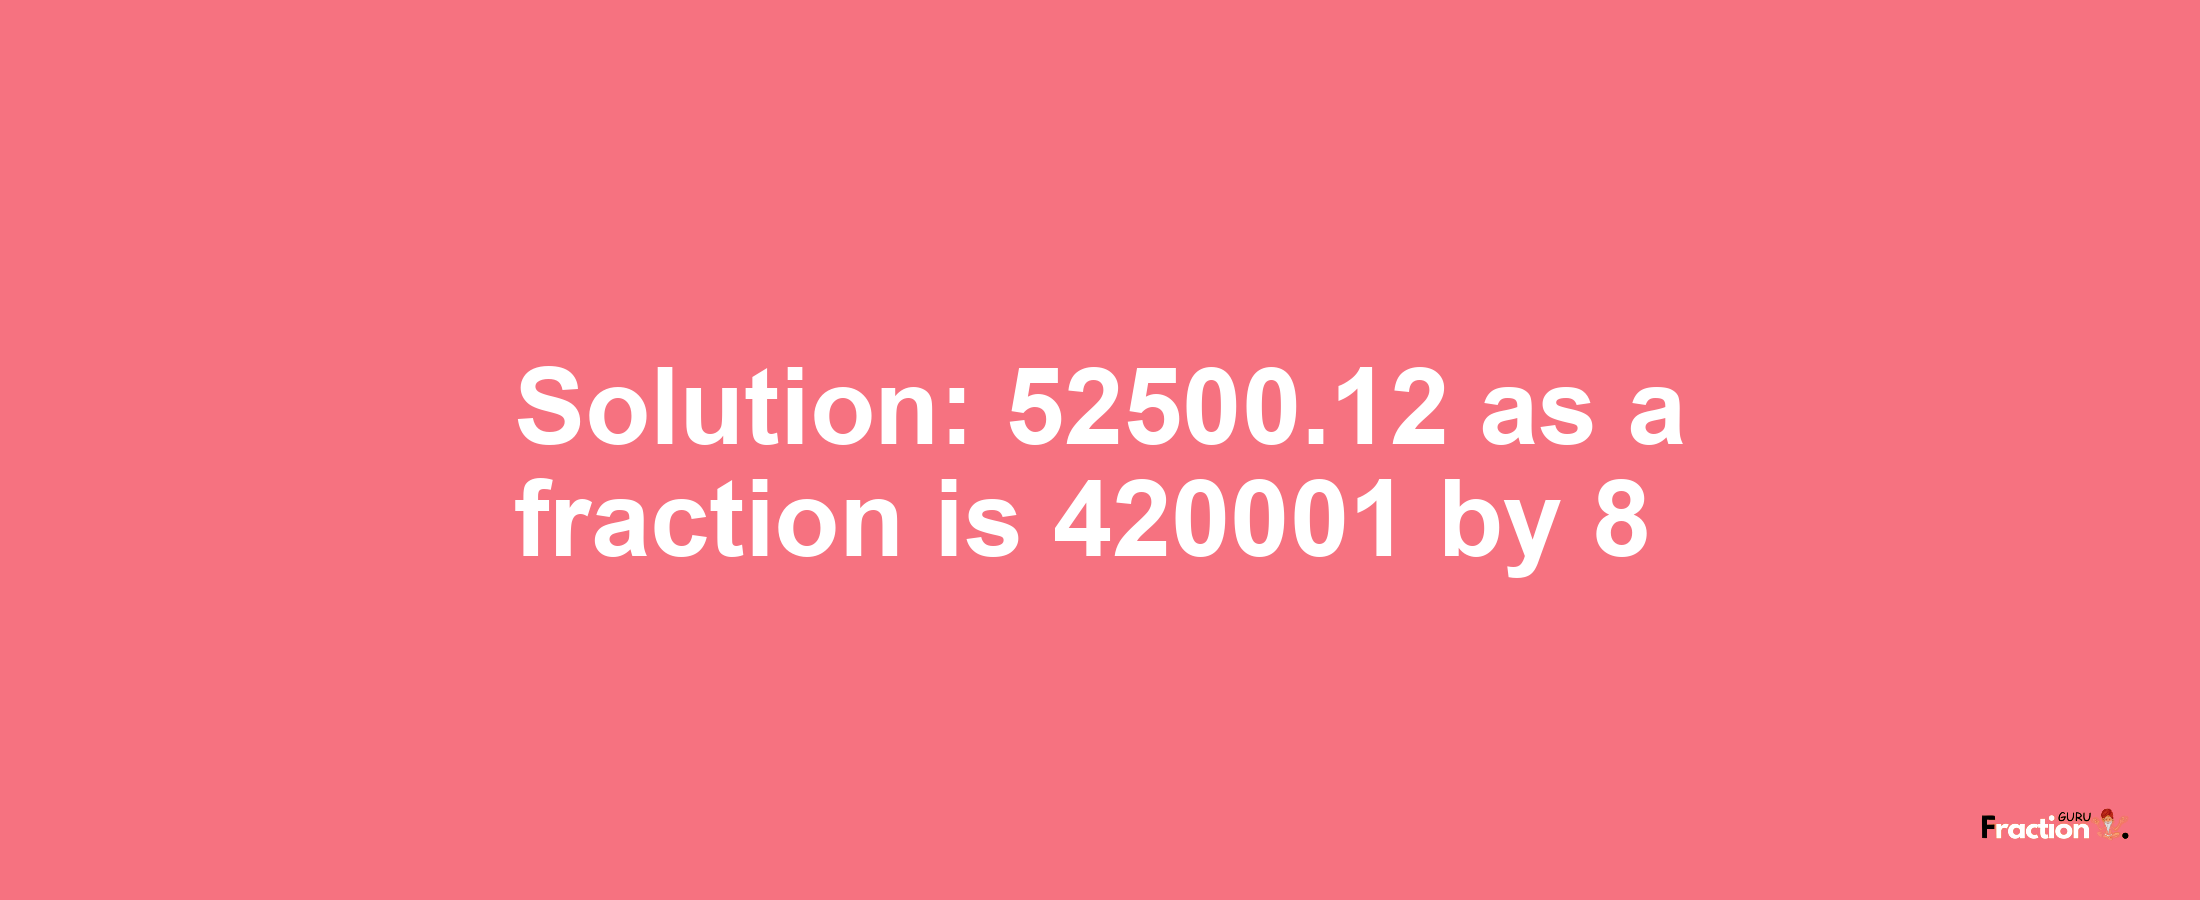 Solution:52500.12 as a fraction is 420001/8